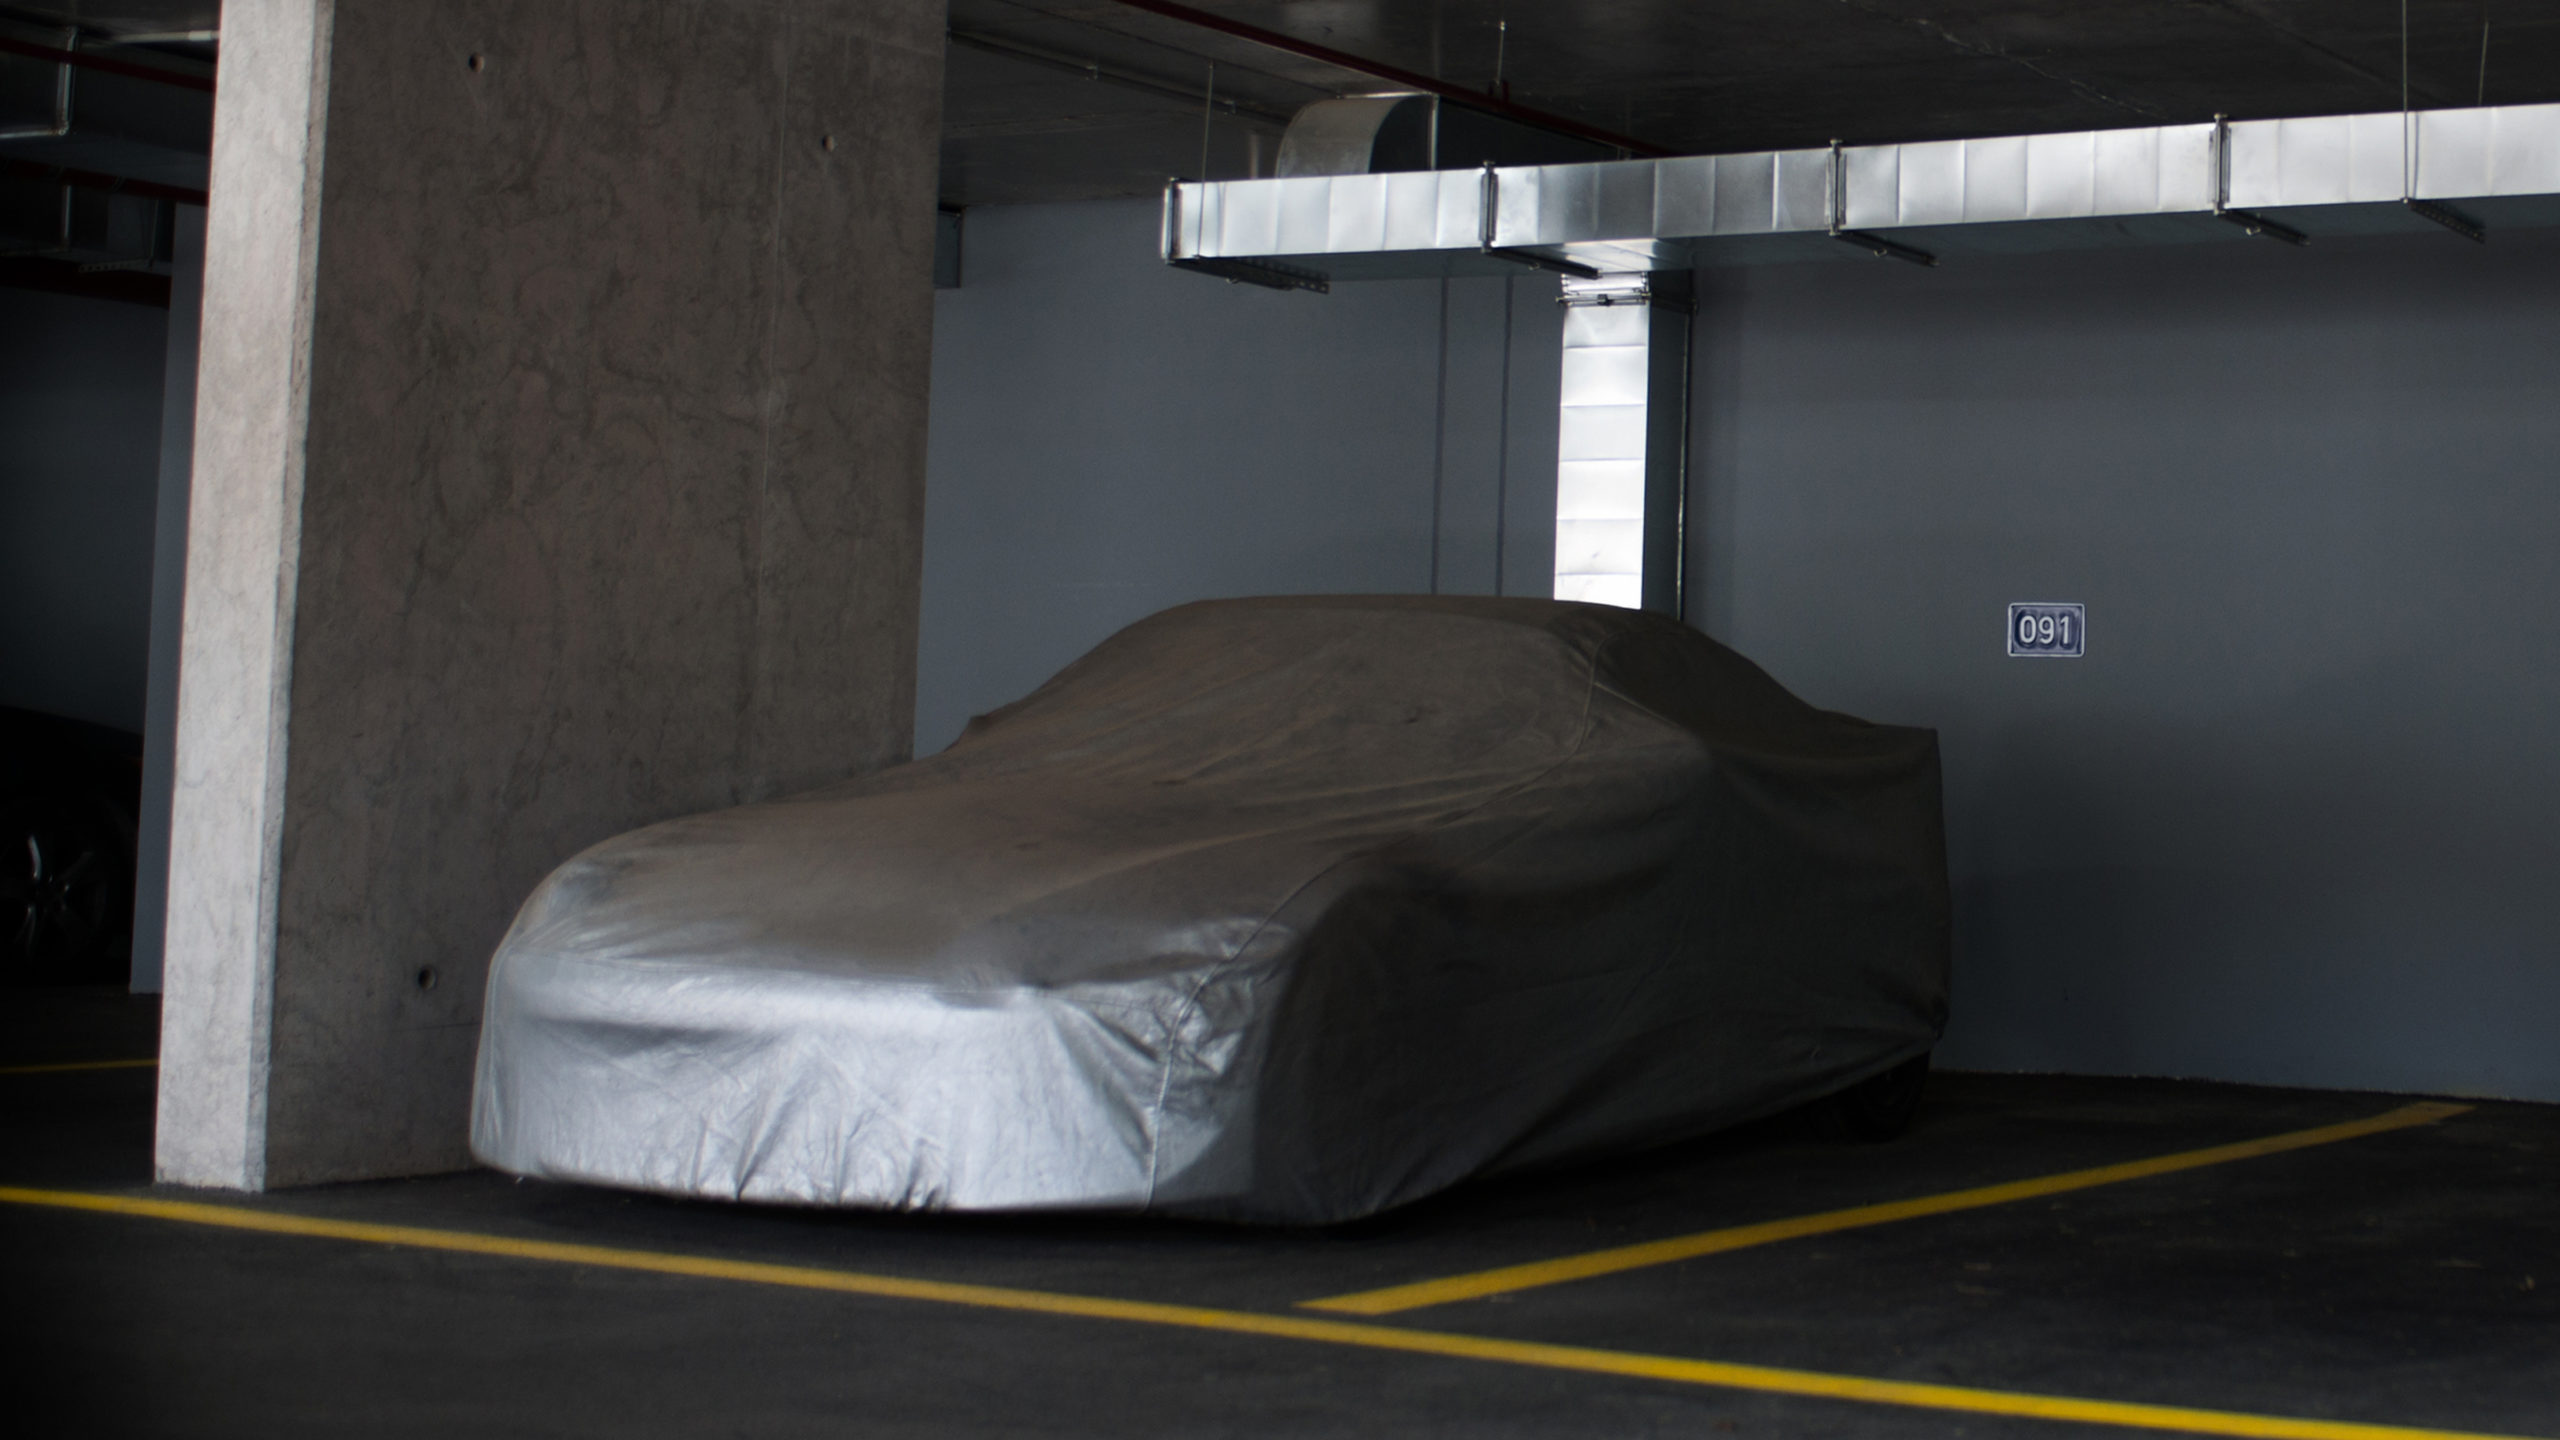 Outdoor car cover buying guide